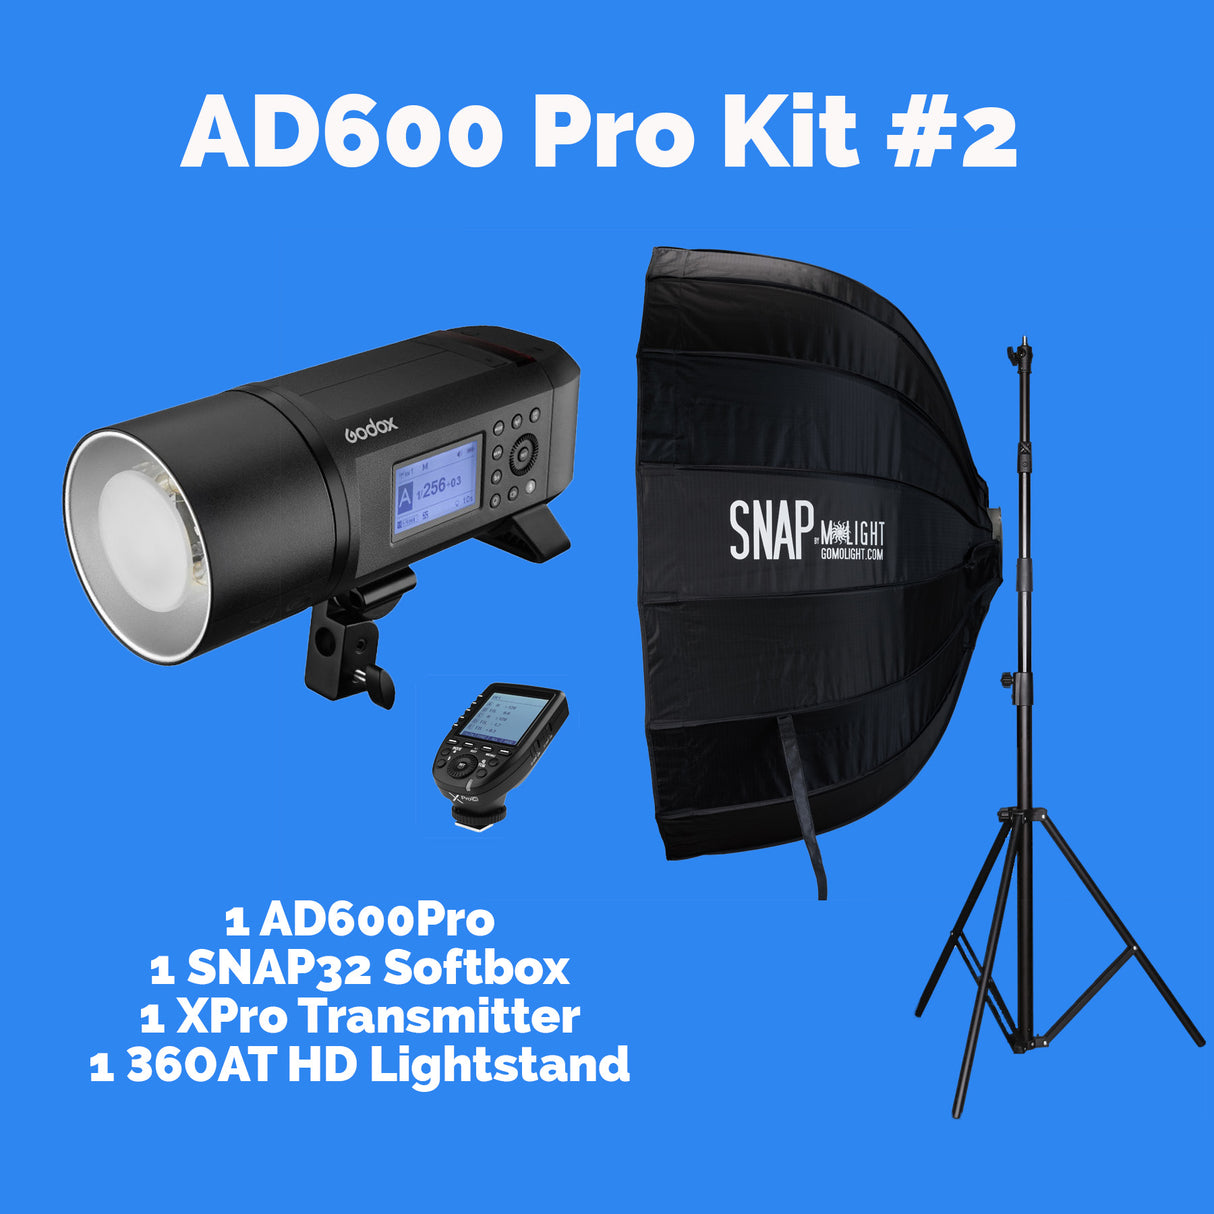 AD600Pro Kit #2 with SNAP32